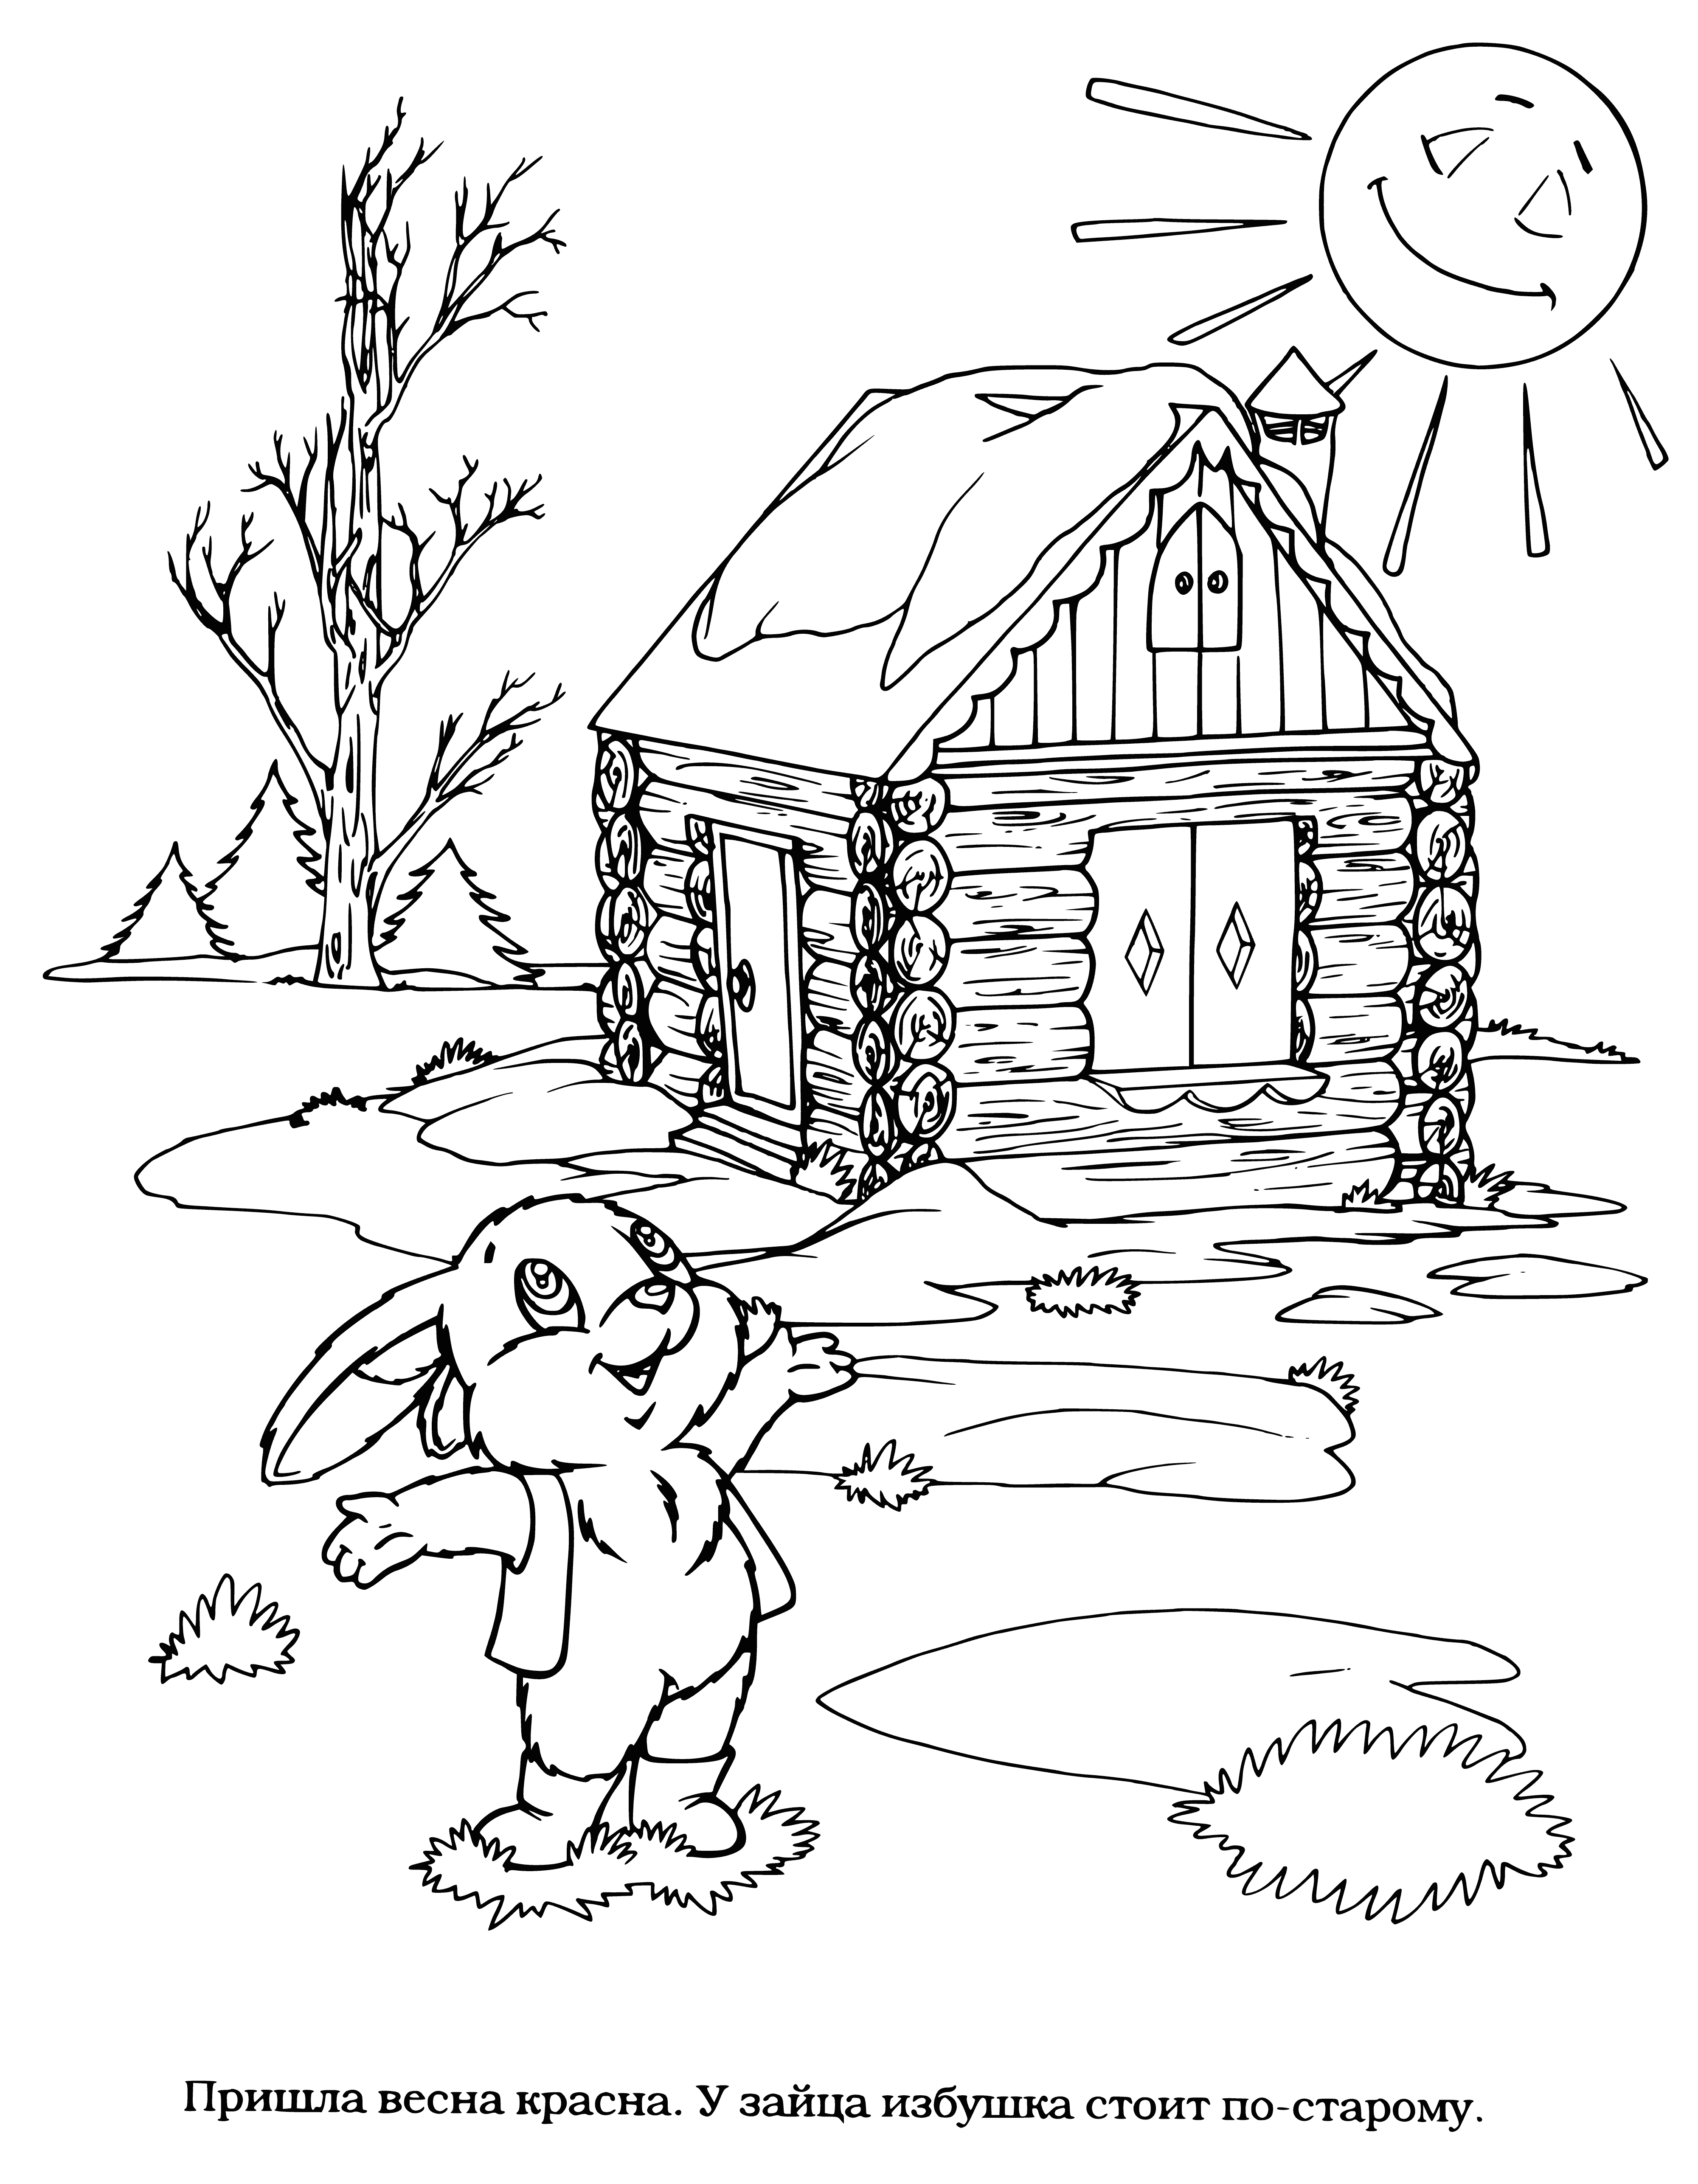 coloring page: A palace with a moat and a hut on chicken legs beside a pile of coins, with a Hare in front.